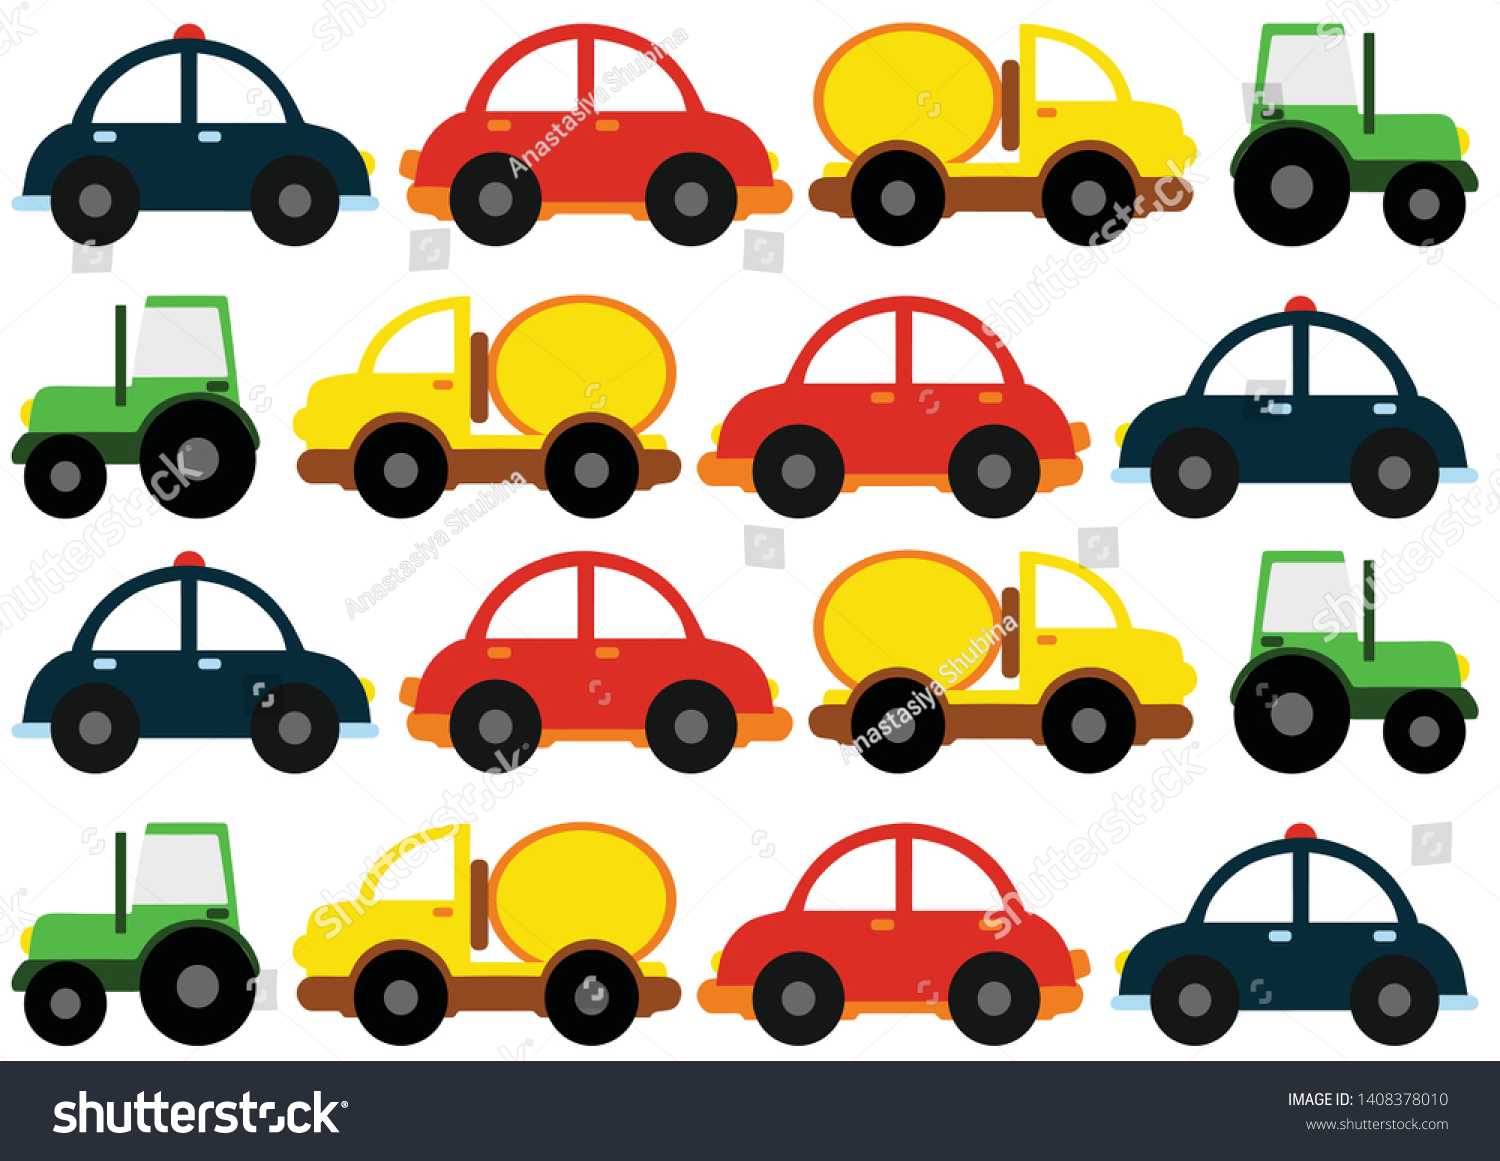 Download Four Kids Cartoon Cars Red Yellow Stock Vector Royalty Free 1408378010 Yellowimages Mockups